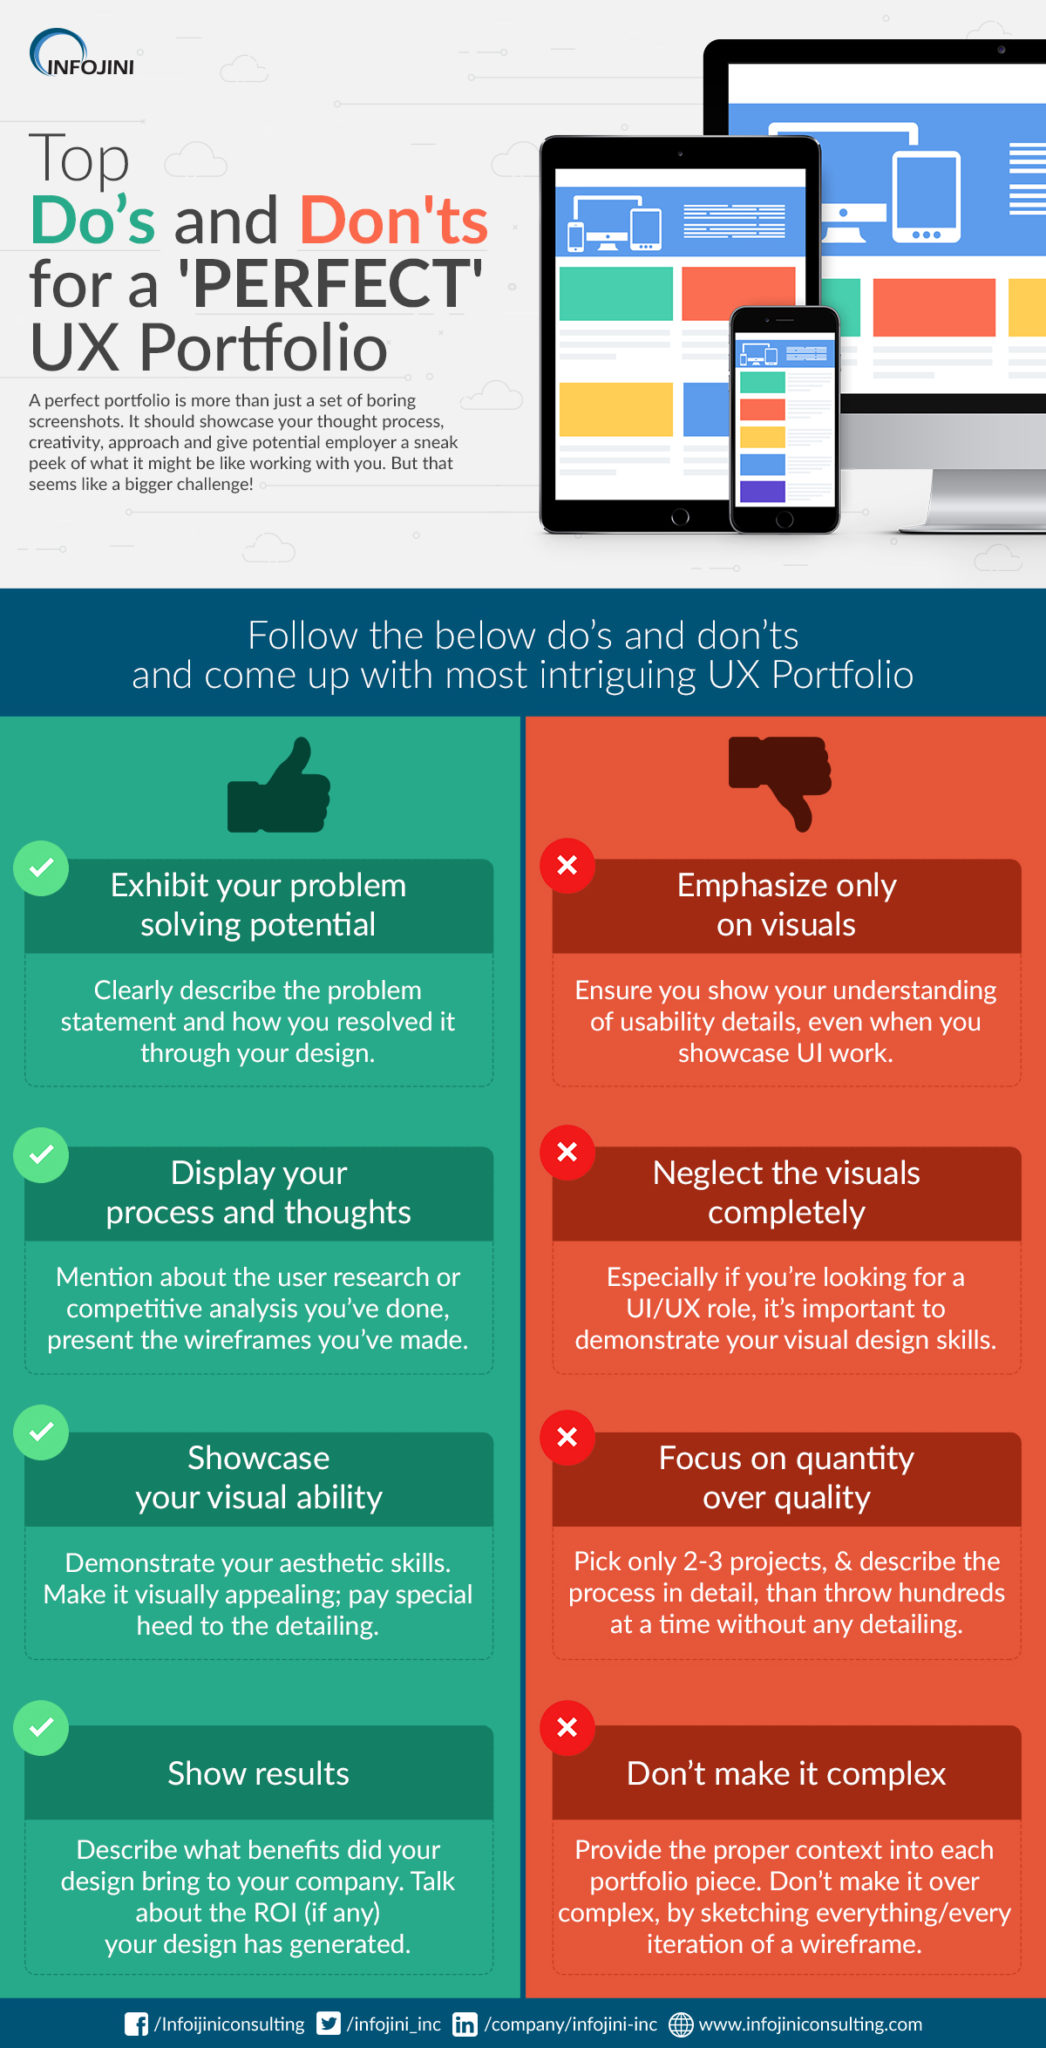 Do’s and Don’ts for a Better UX Portfolio